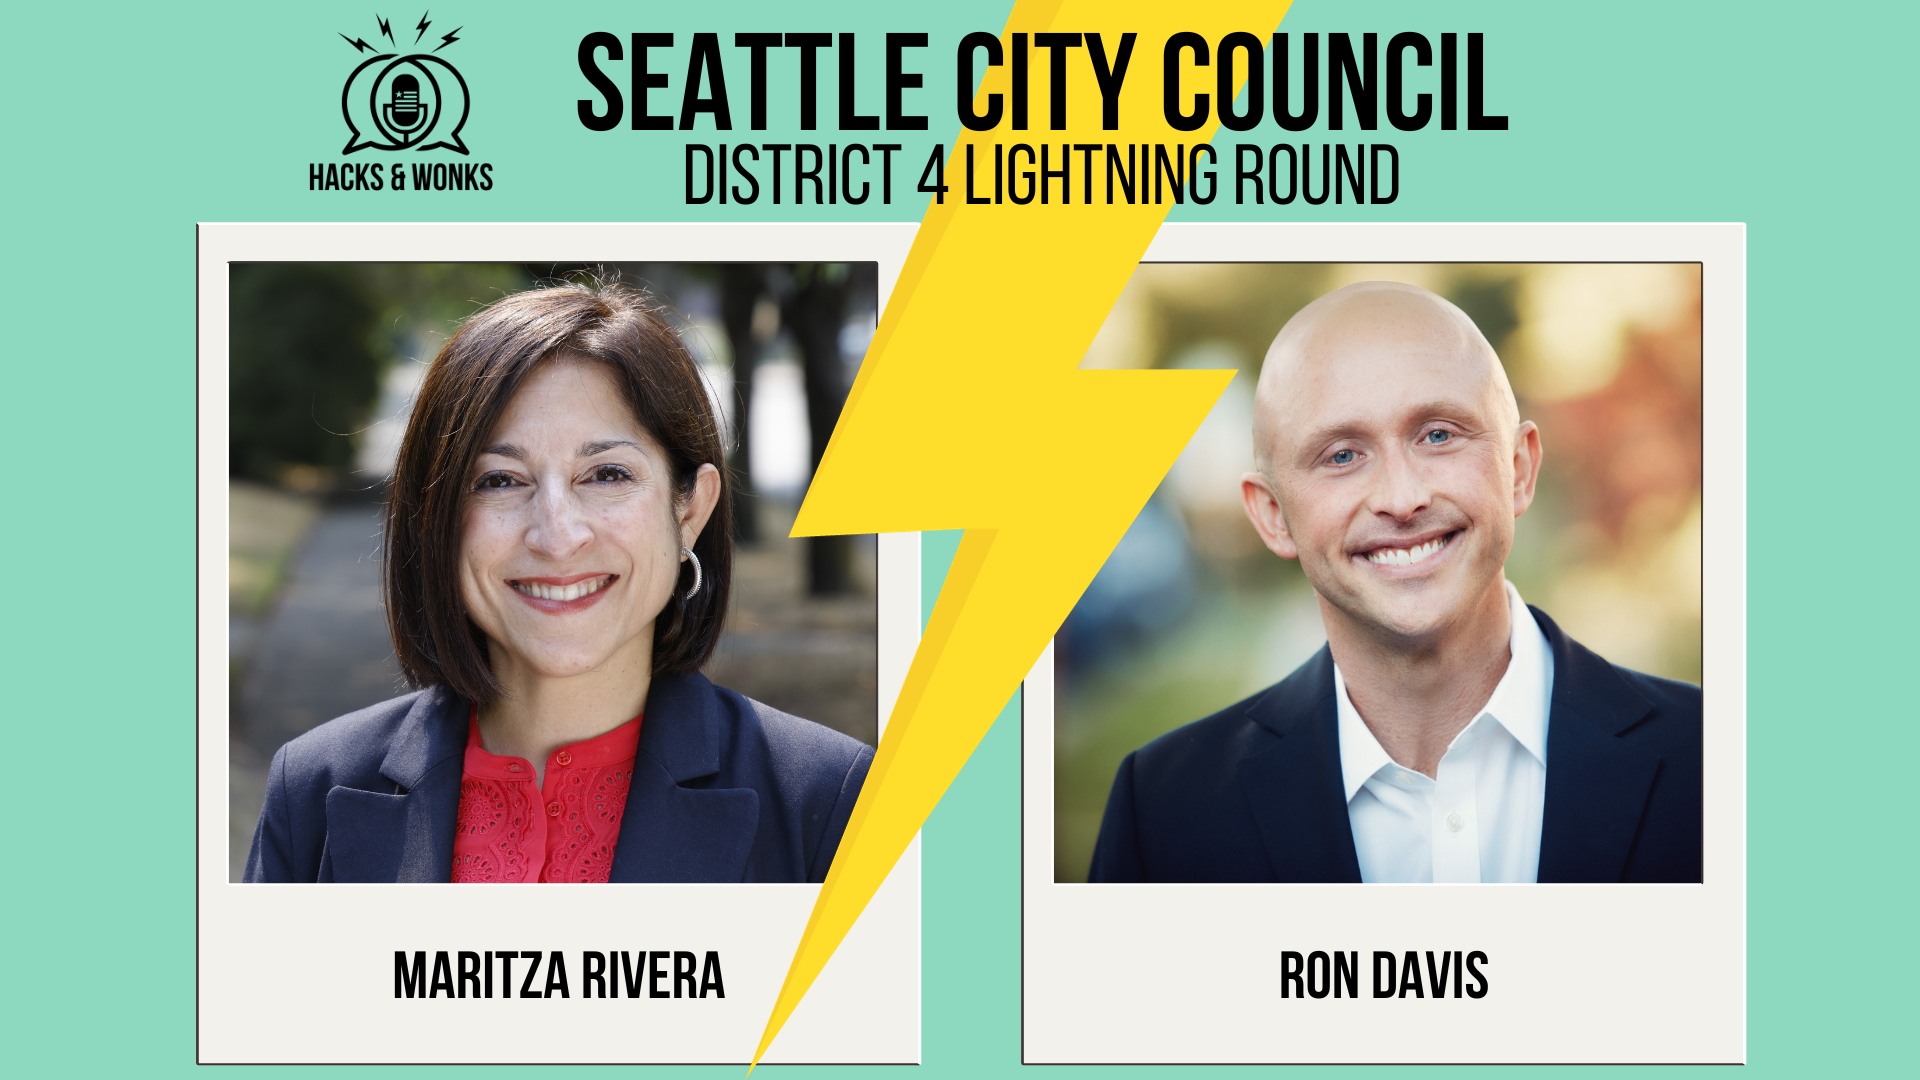 Hacks & Wonks Seattle City Council District 4 Lightning Round  Lightning bolt divides photos of the District 4 candidates: Maritza Rivera and Ron Davis